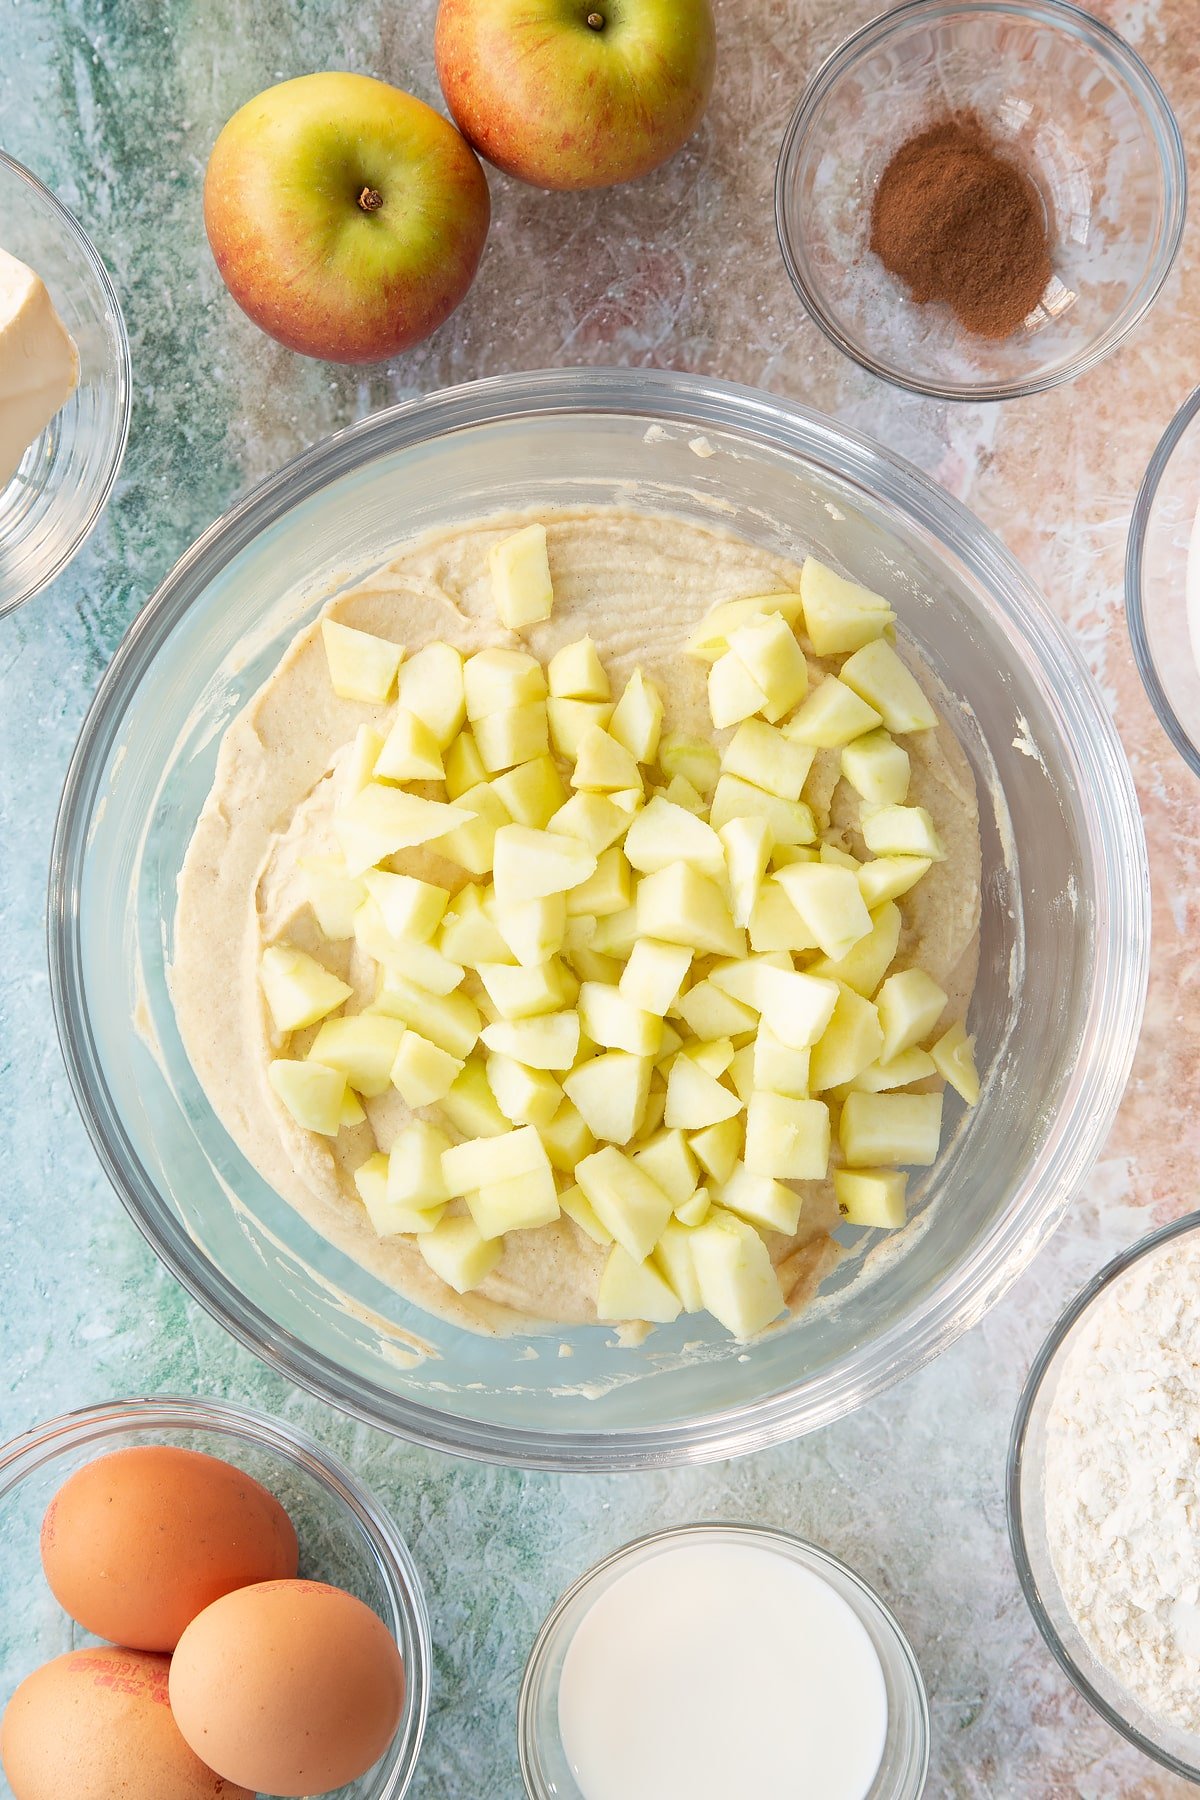 Adding sliced apples into the mixing bowl of cake ingredients.